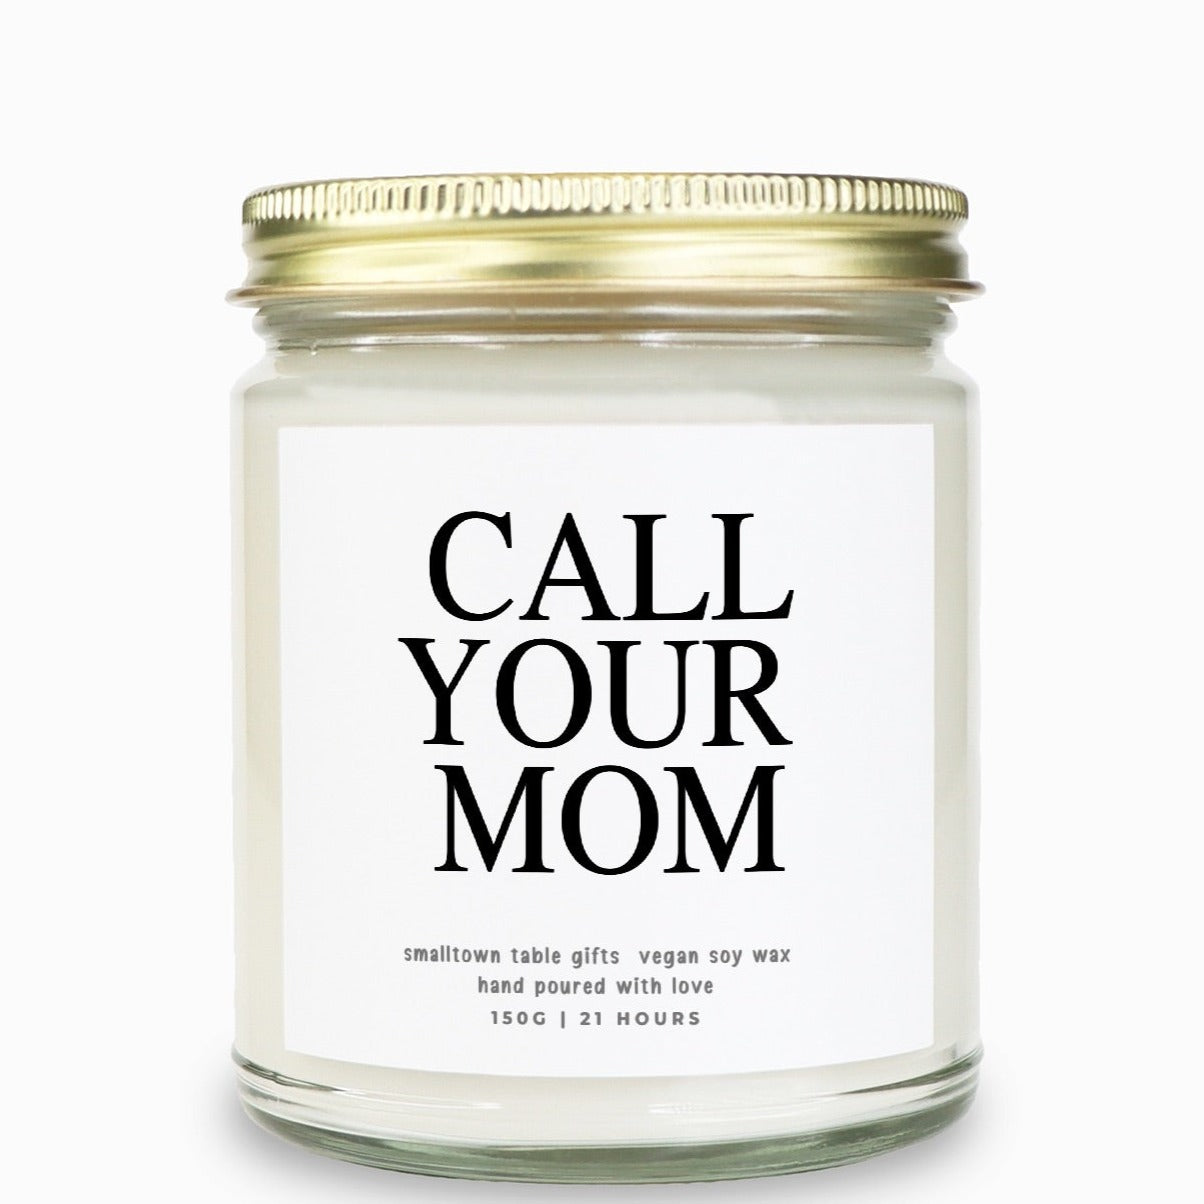 call your mom canld e with gold lid in glass jar white label black writing